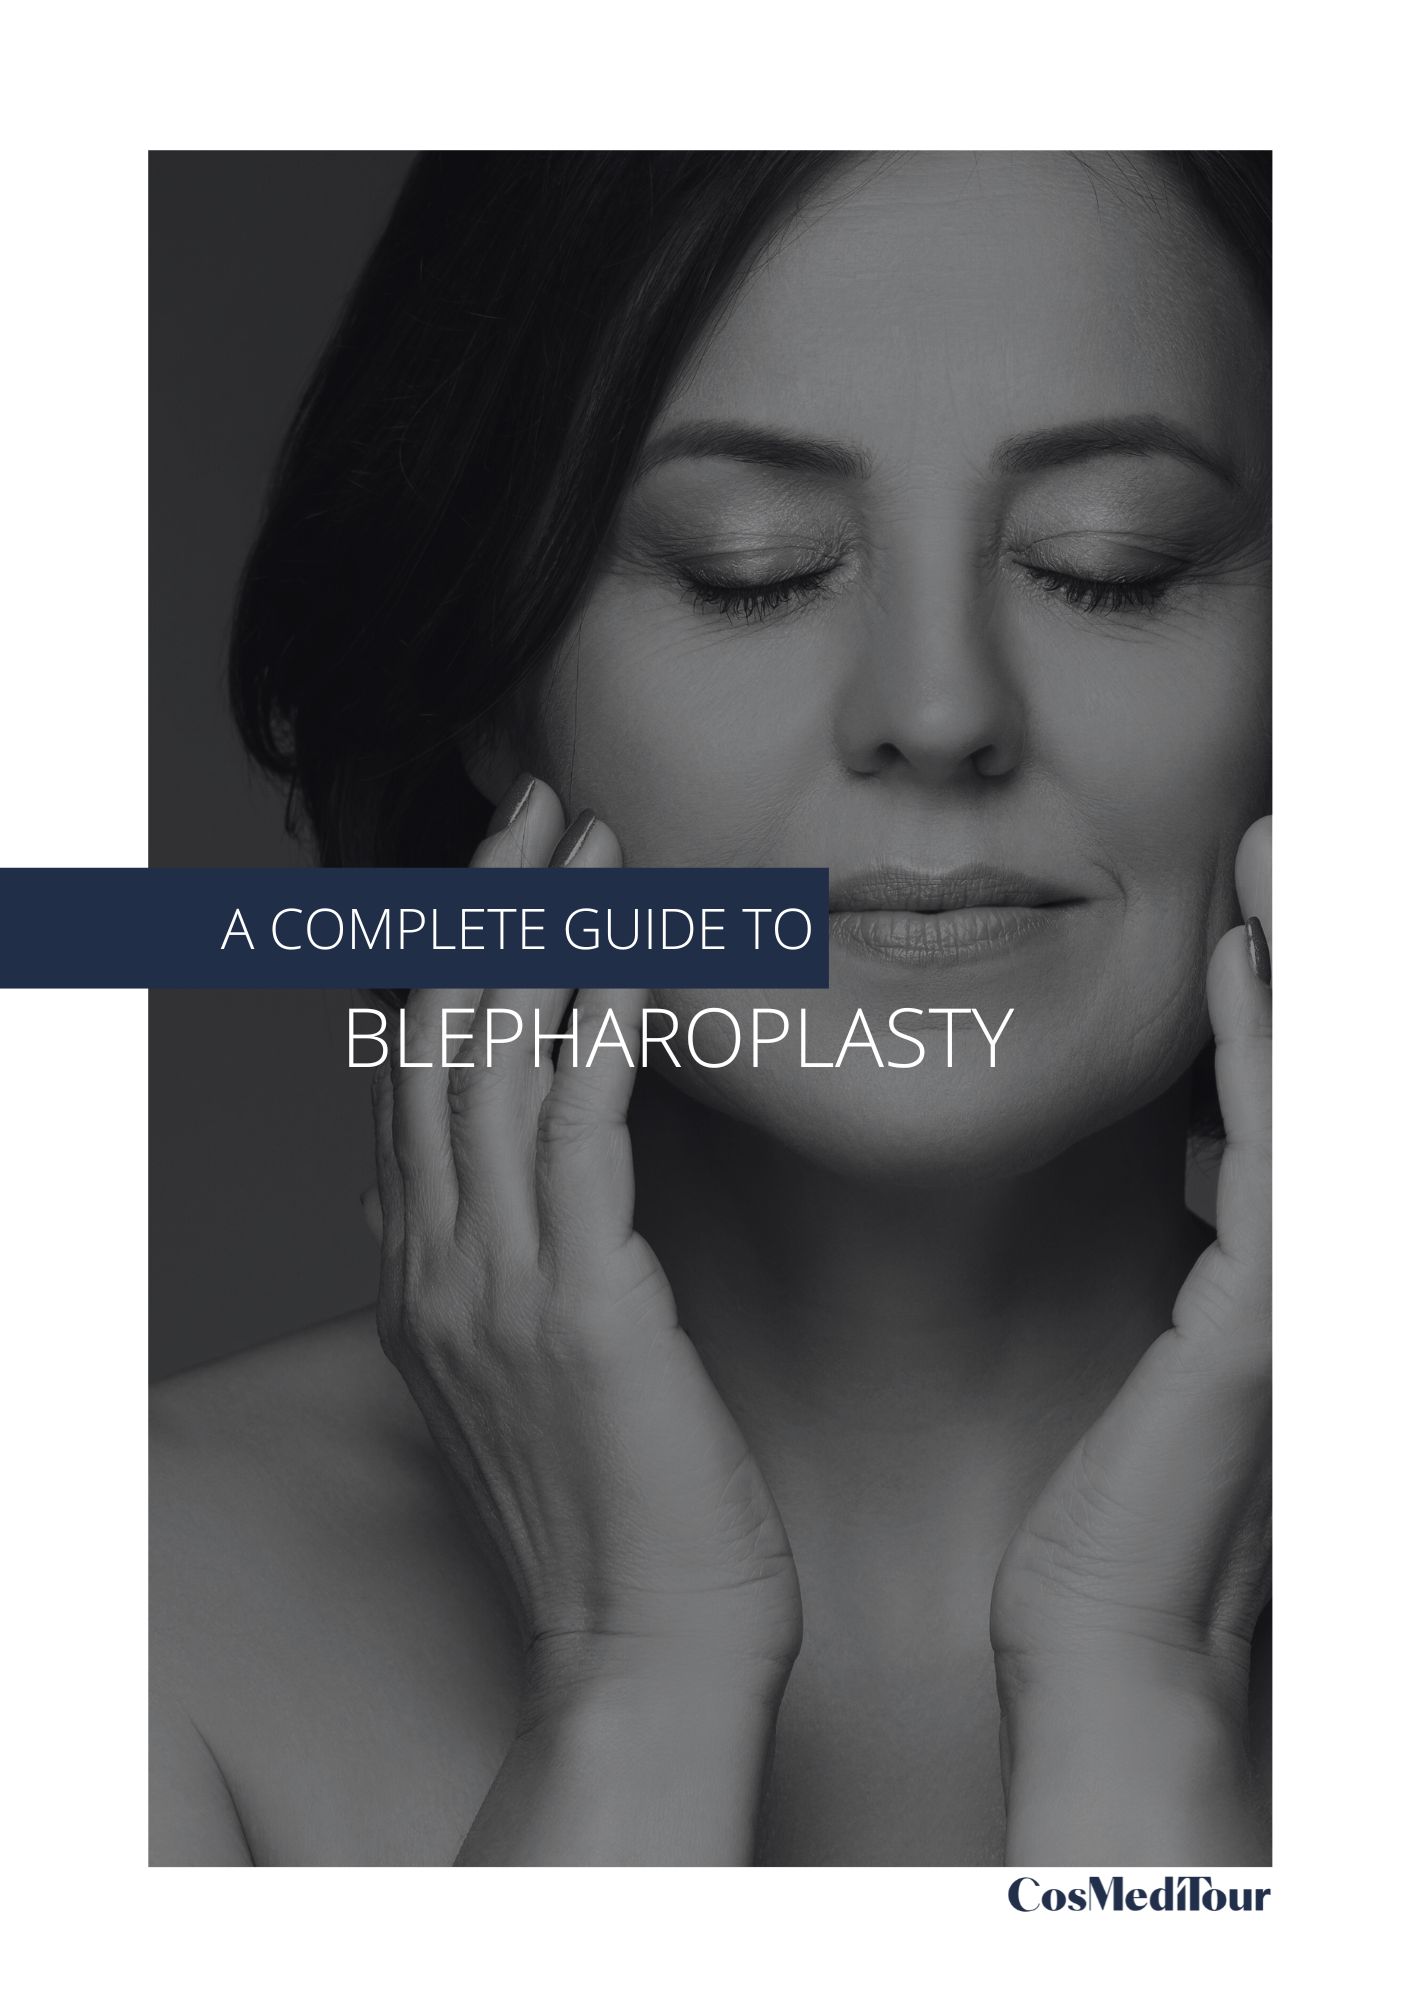 Your Guide to Blepharoplasty